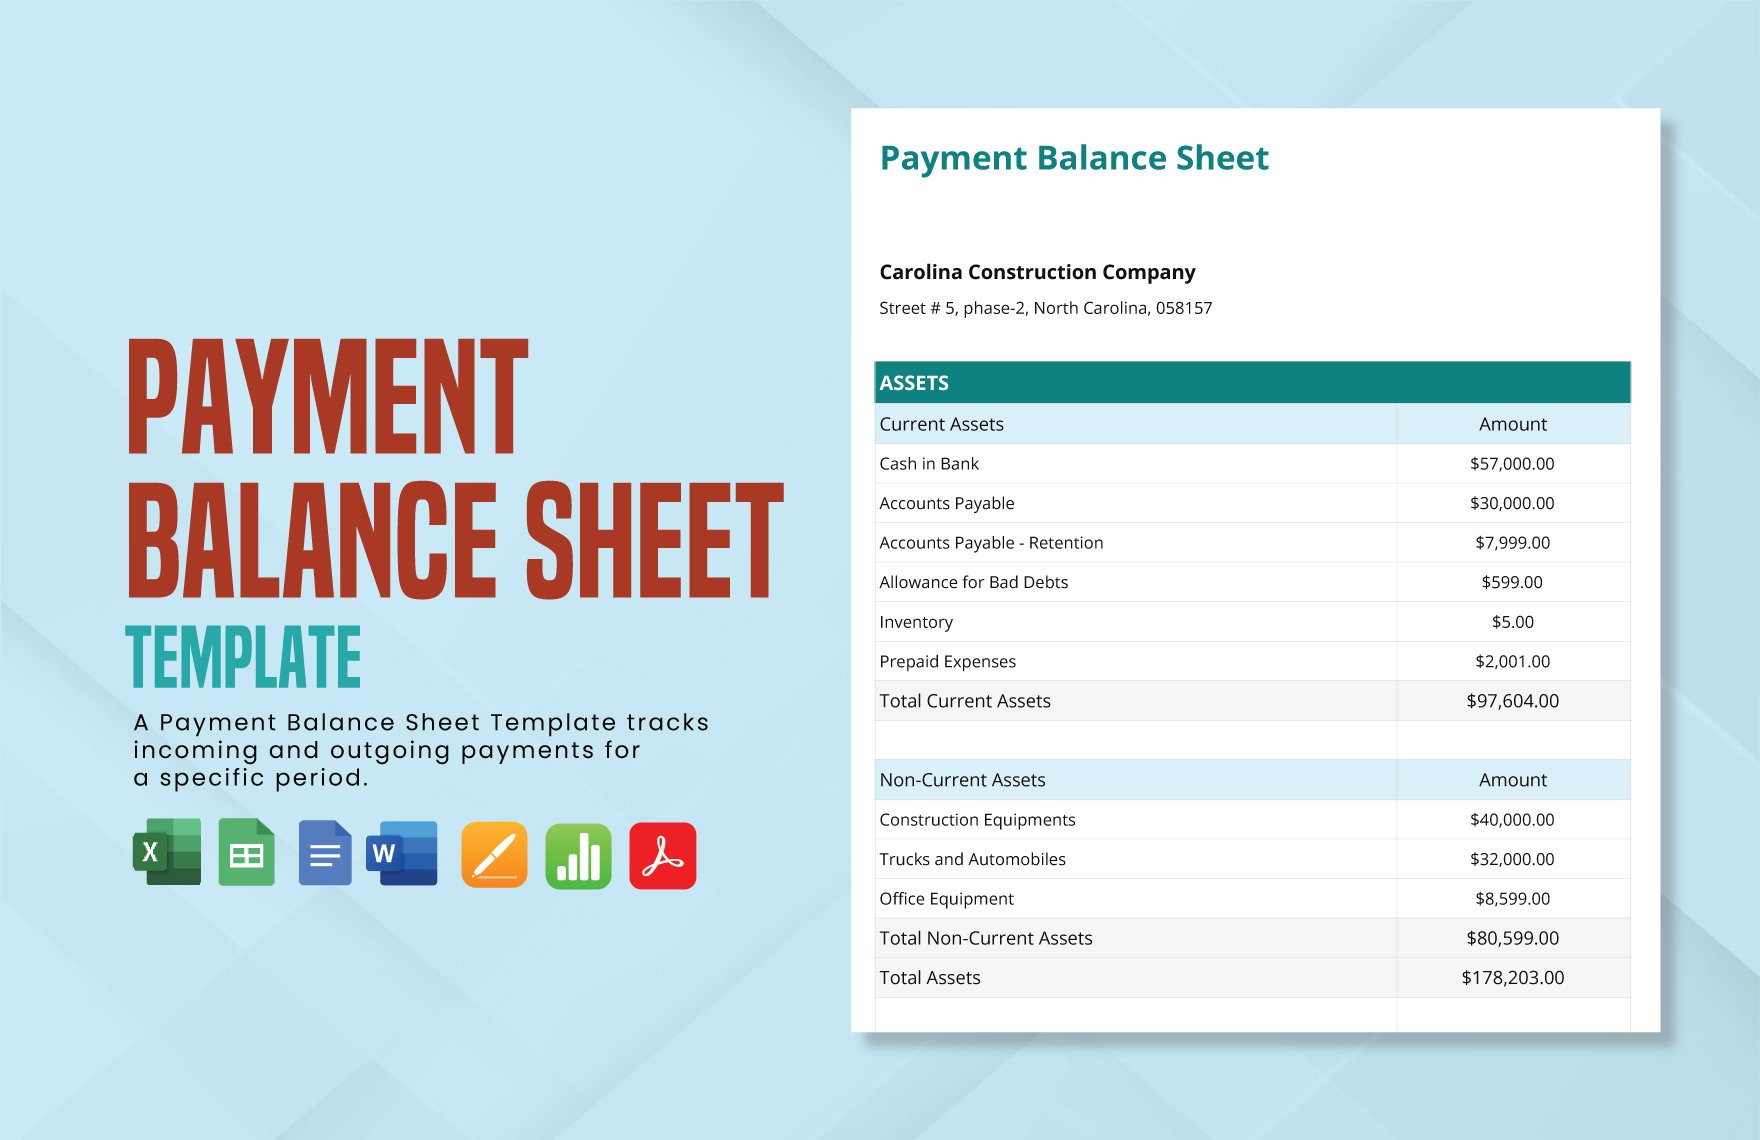 Payment Balance Sheet Template in Word, Google Docs, Excel, PDF, Google Sheets, Apple Pages, Apple Numbers